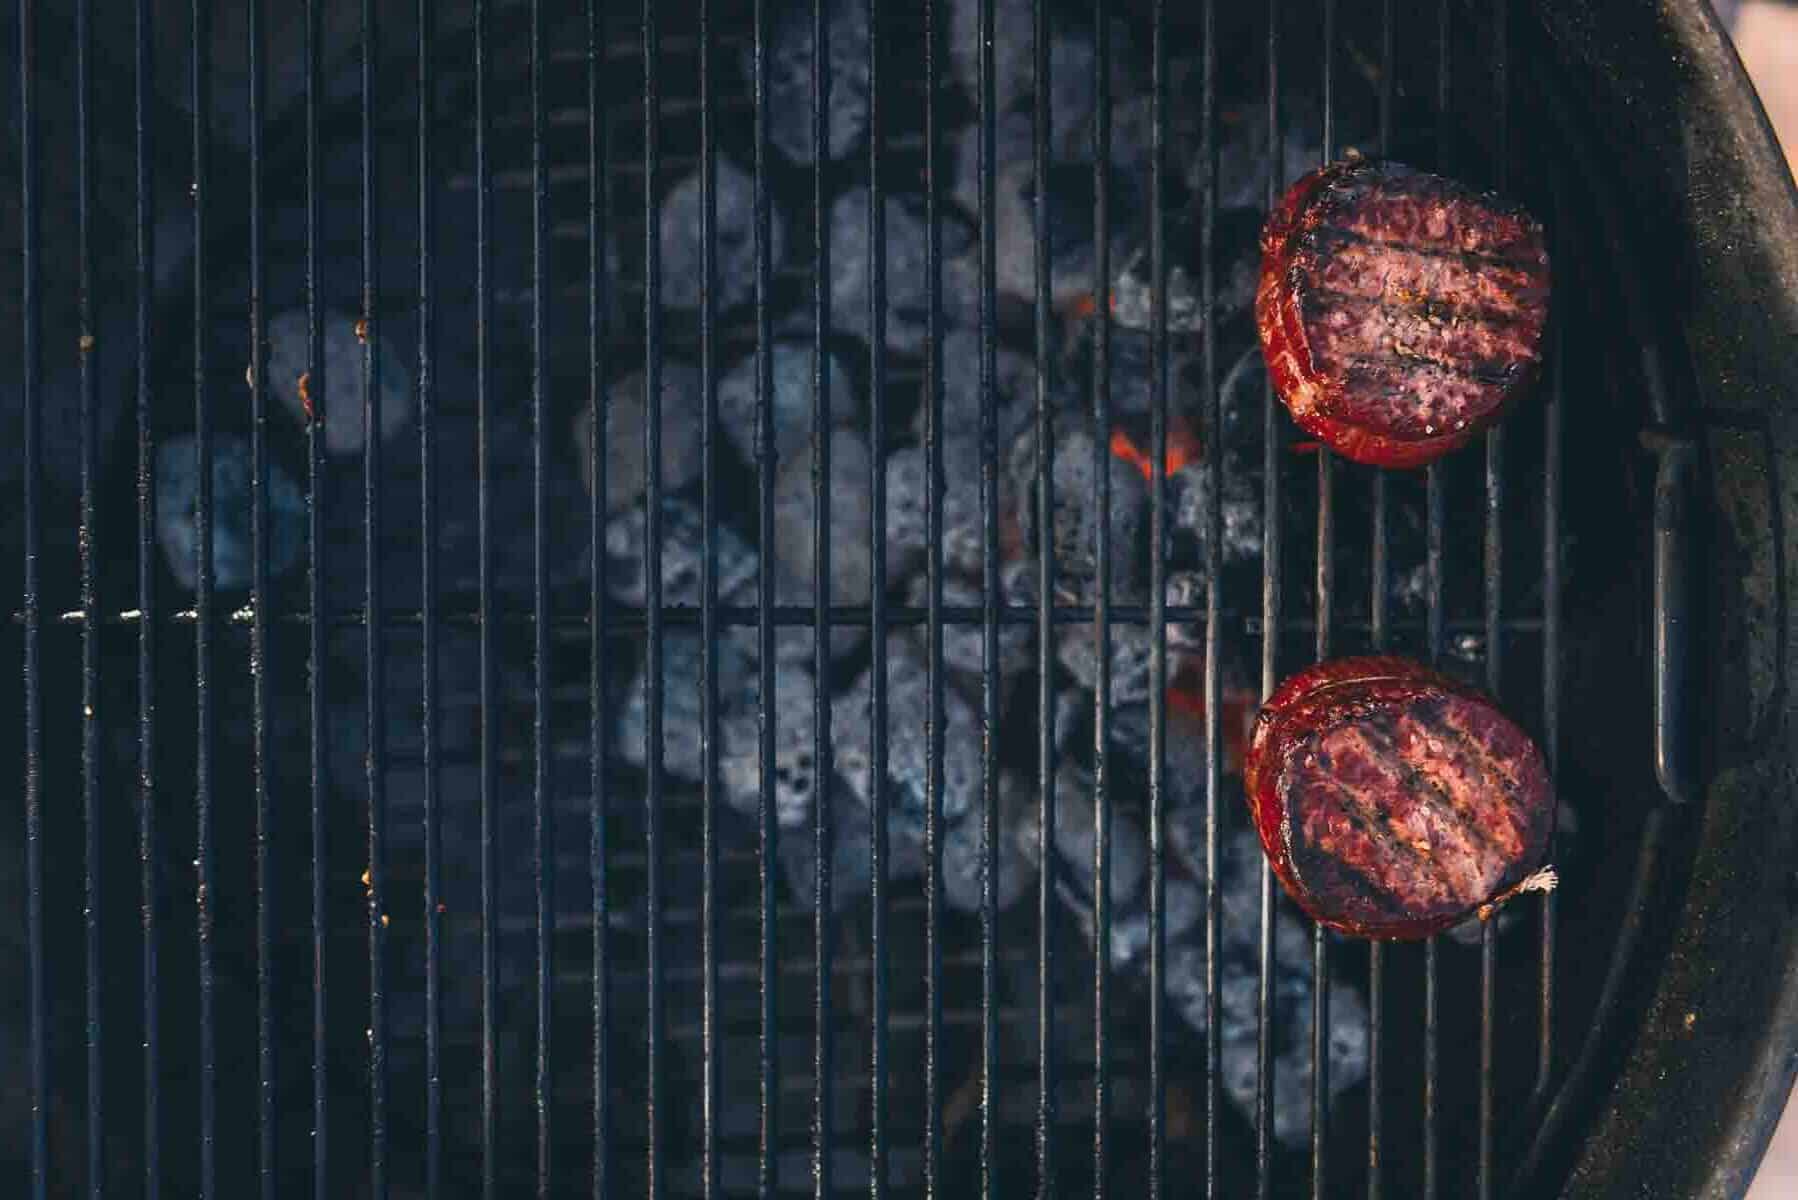 Filets over direct heat on a charcoal grill. 